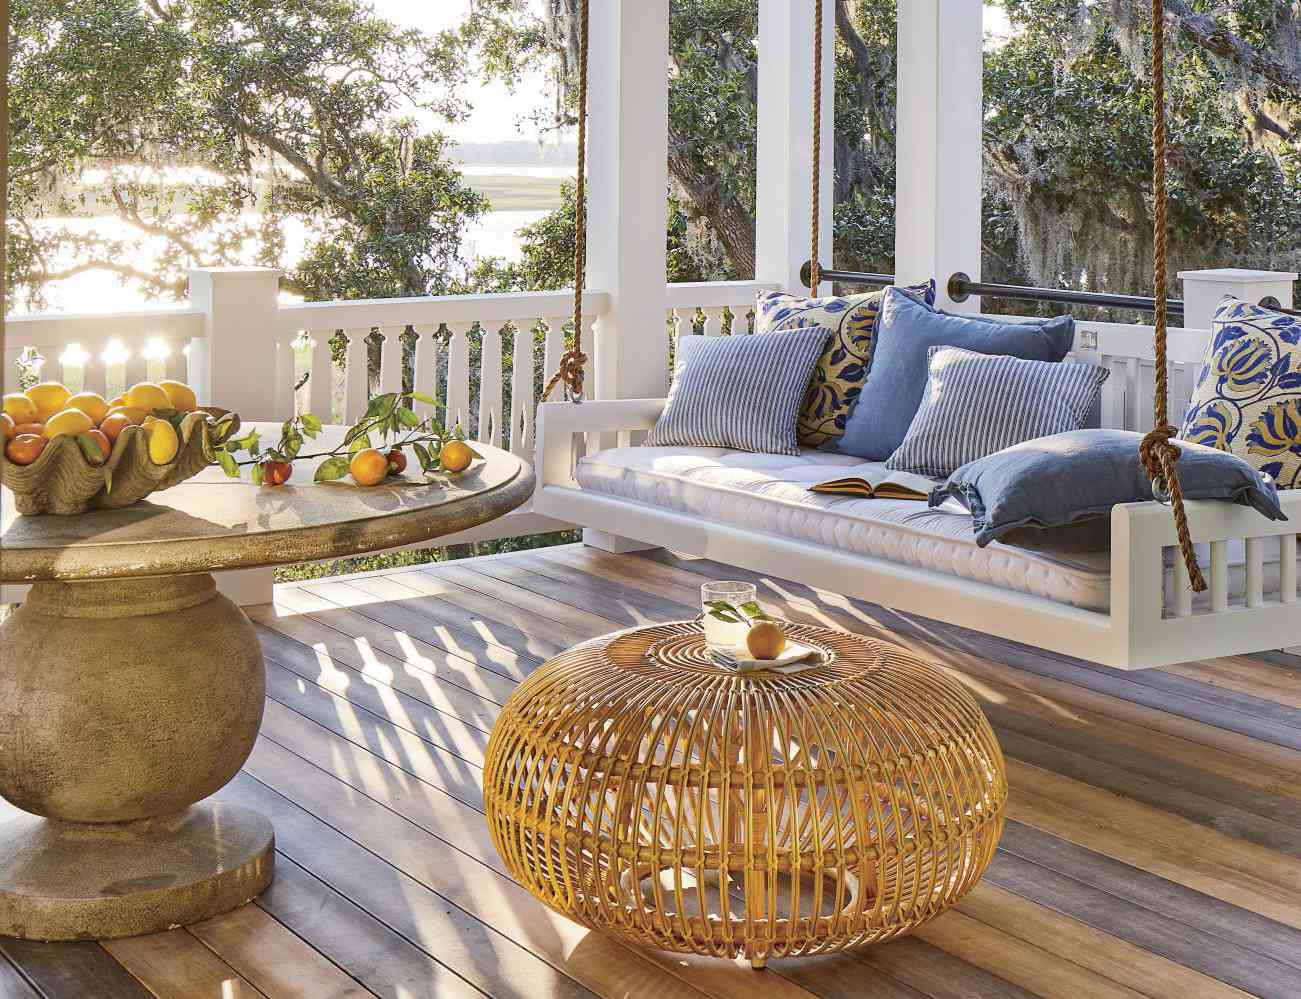 How To Make Porch Furniture